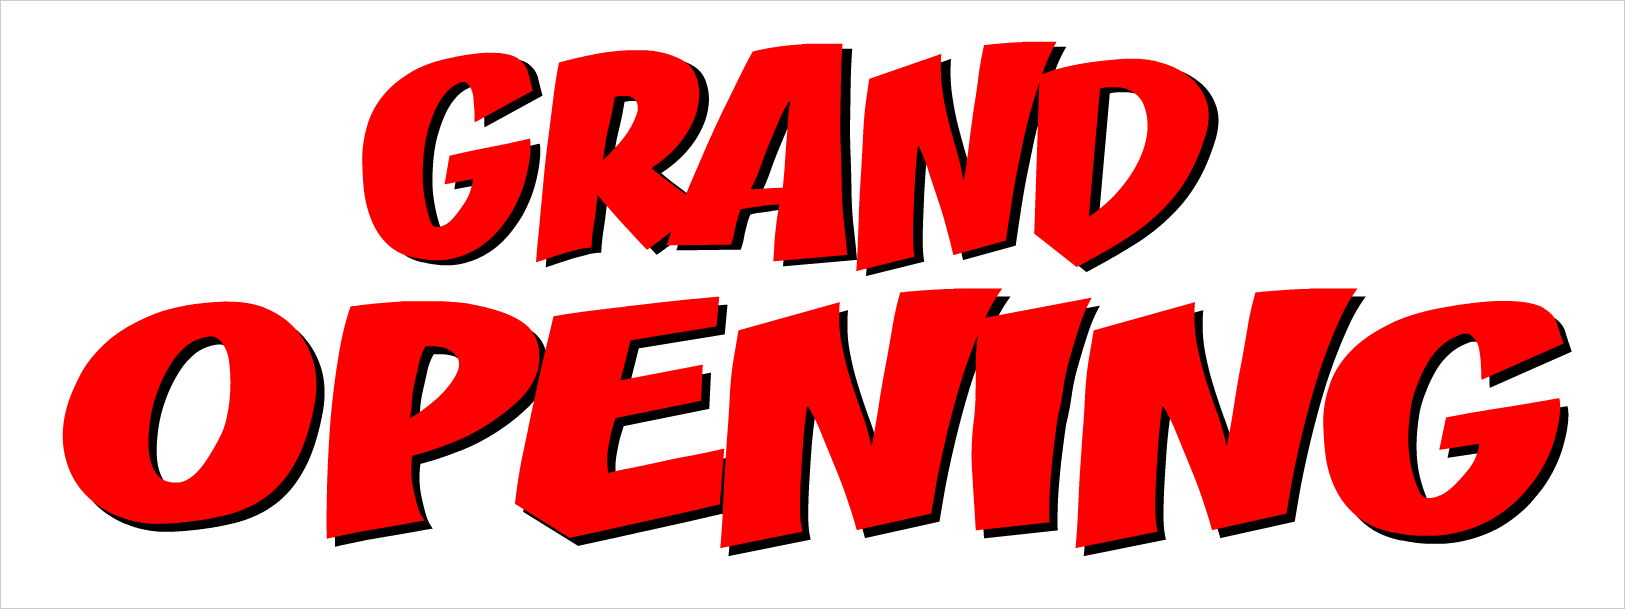 Grand Opening Vinyl Banners from $11.64 - 100 White